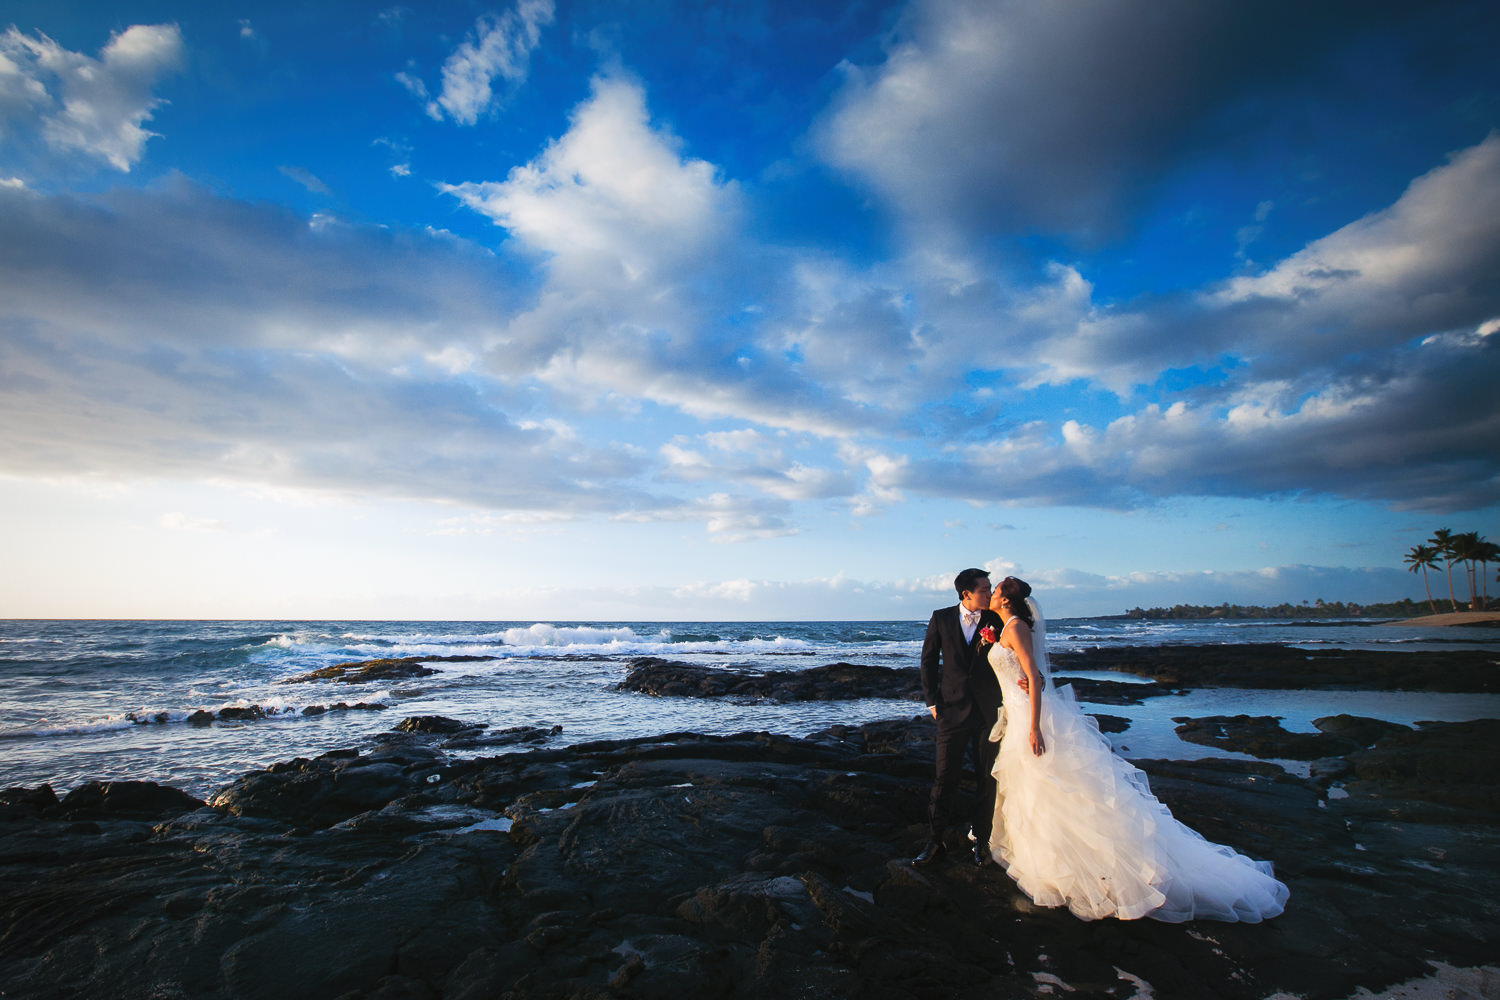 Another great place for wedding photos on the Big Island is this beach at Four Seasons Hualalai